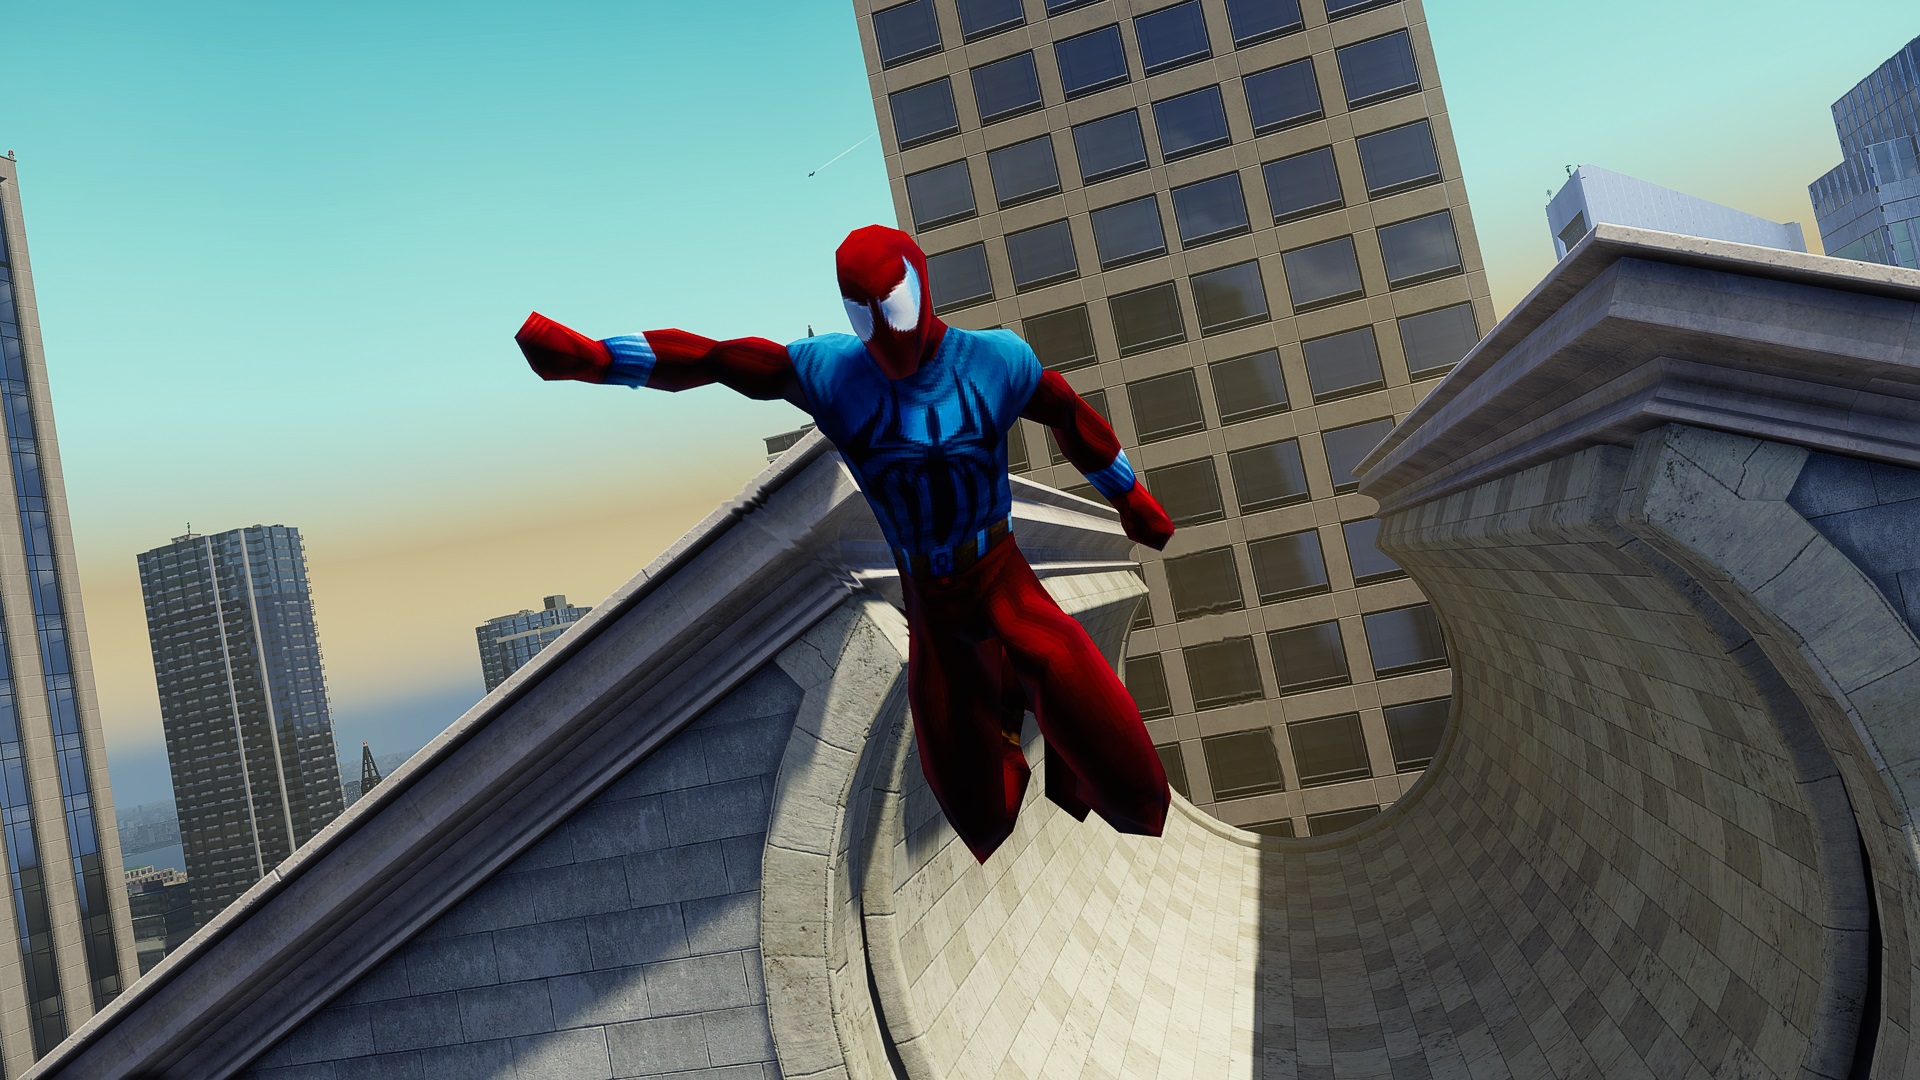 Spider-Man in Ben Reilly cutoff hoodie and red suit costume swinging near distinctive bank building.